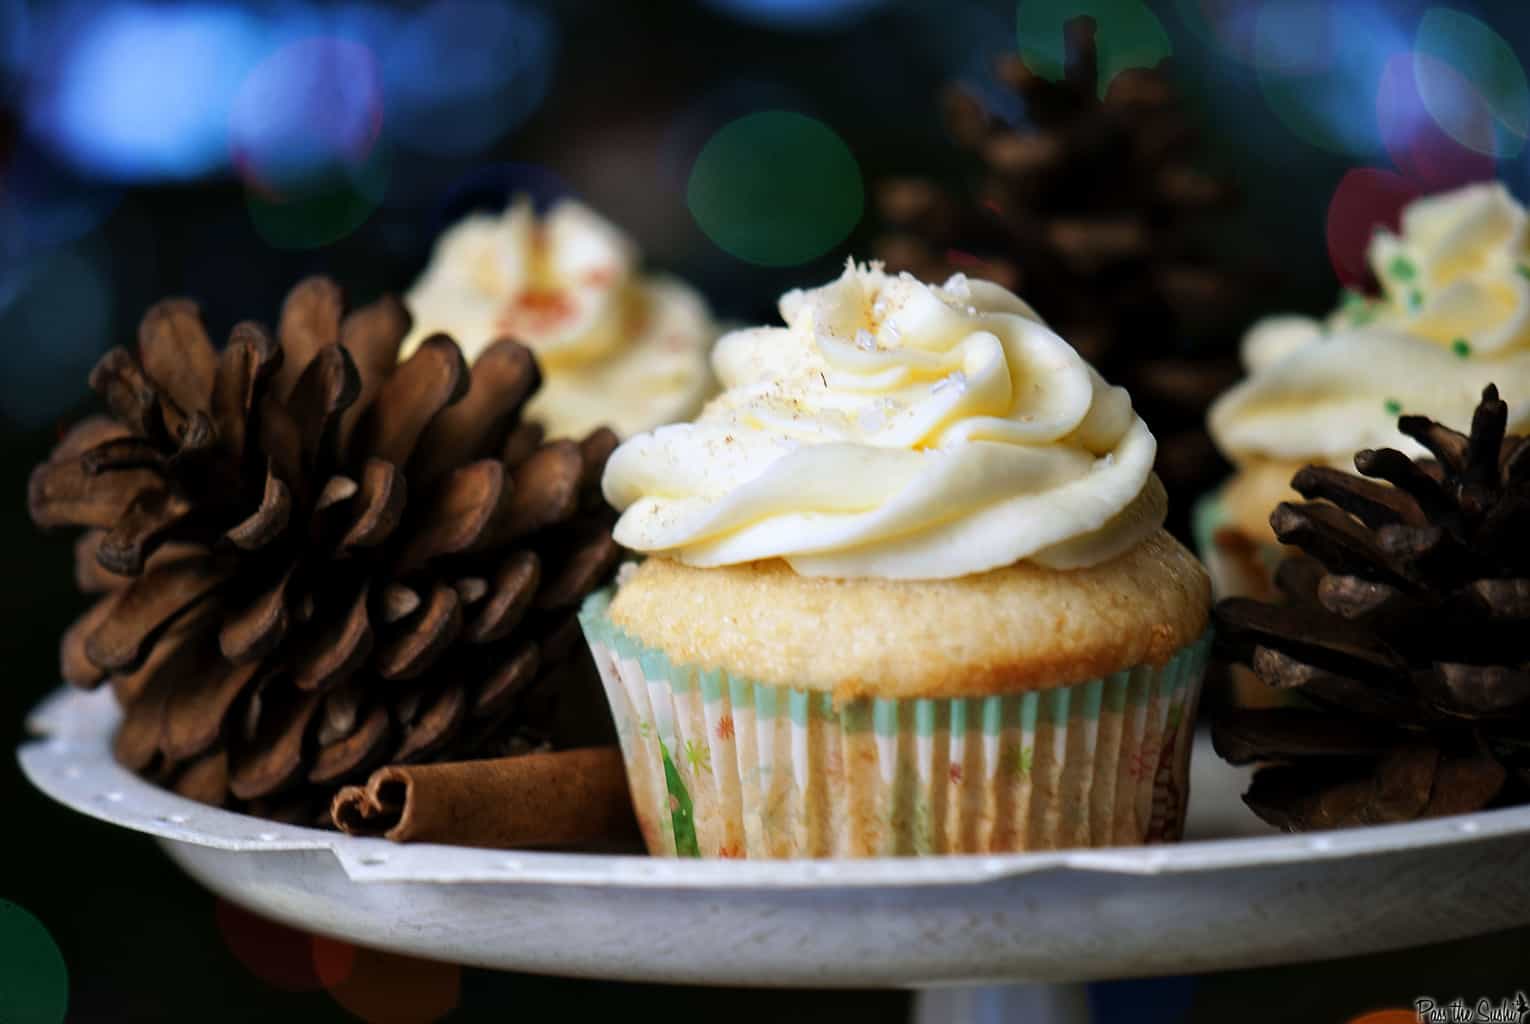 ﻿Eggnog cupcakes ﻿are an easy Christmas dessert recipe that everyone will want seconds of! Top them off with fluffy eggnog frosting and you have a delicious treat! | PassTheSushi.com